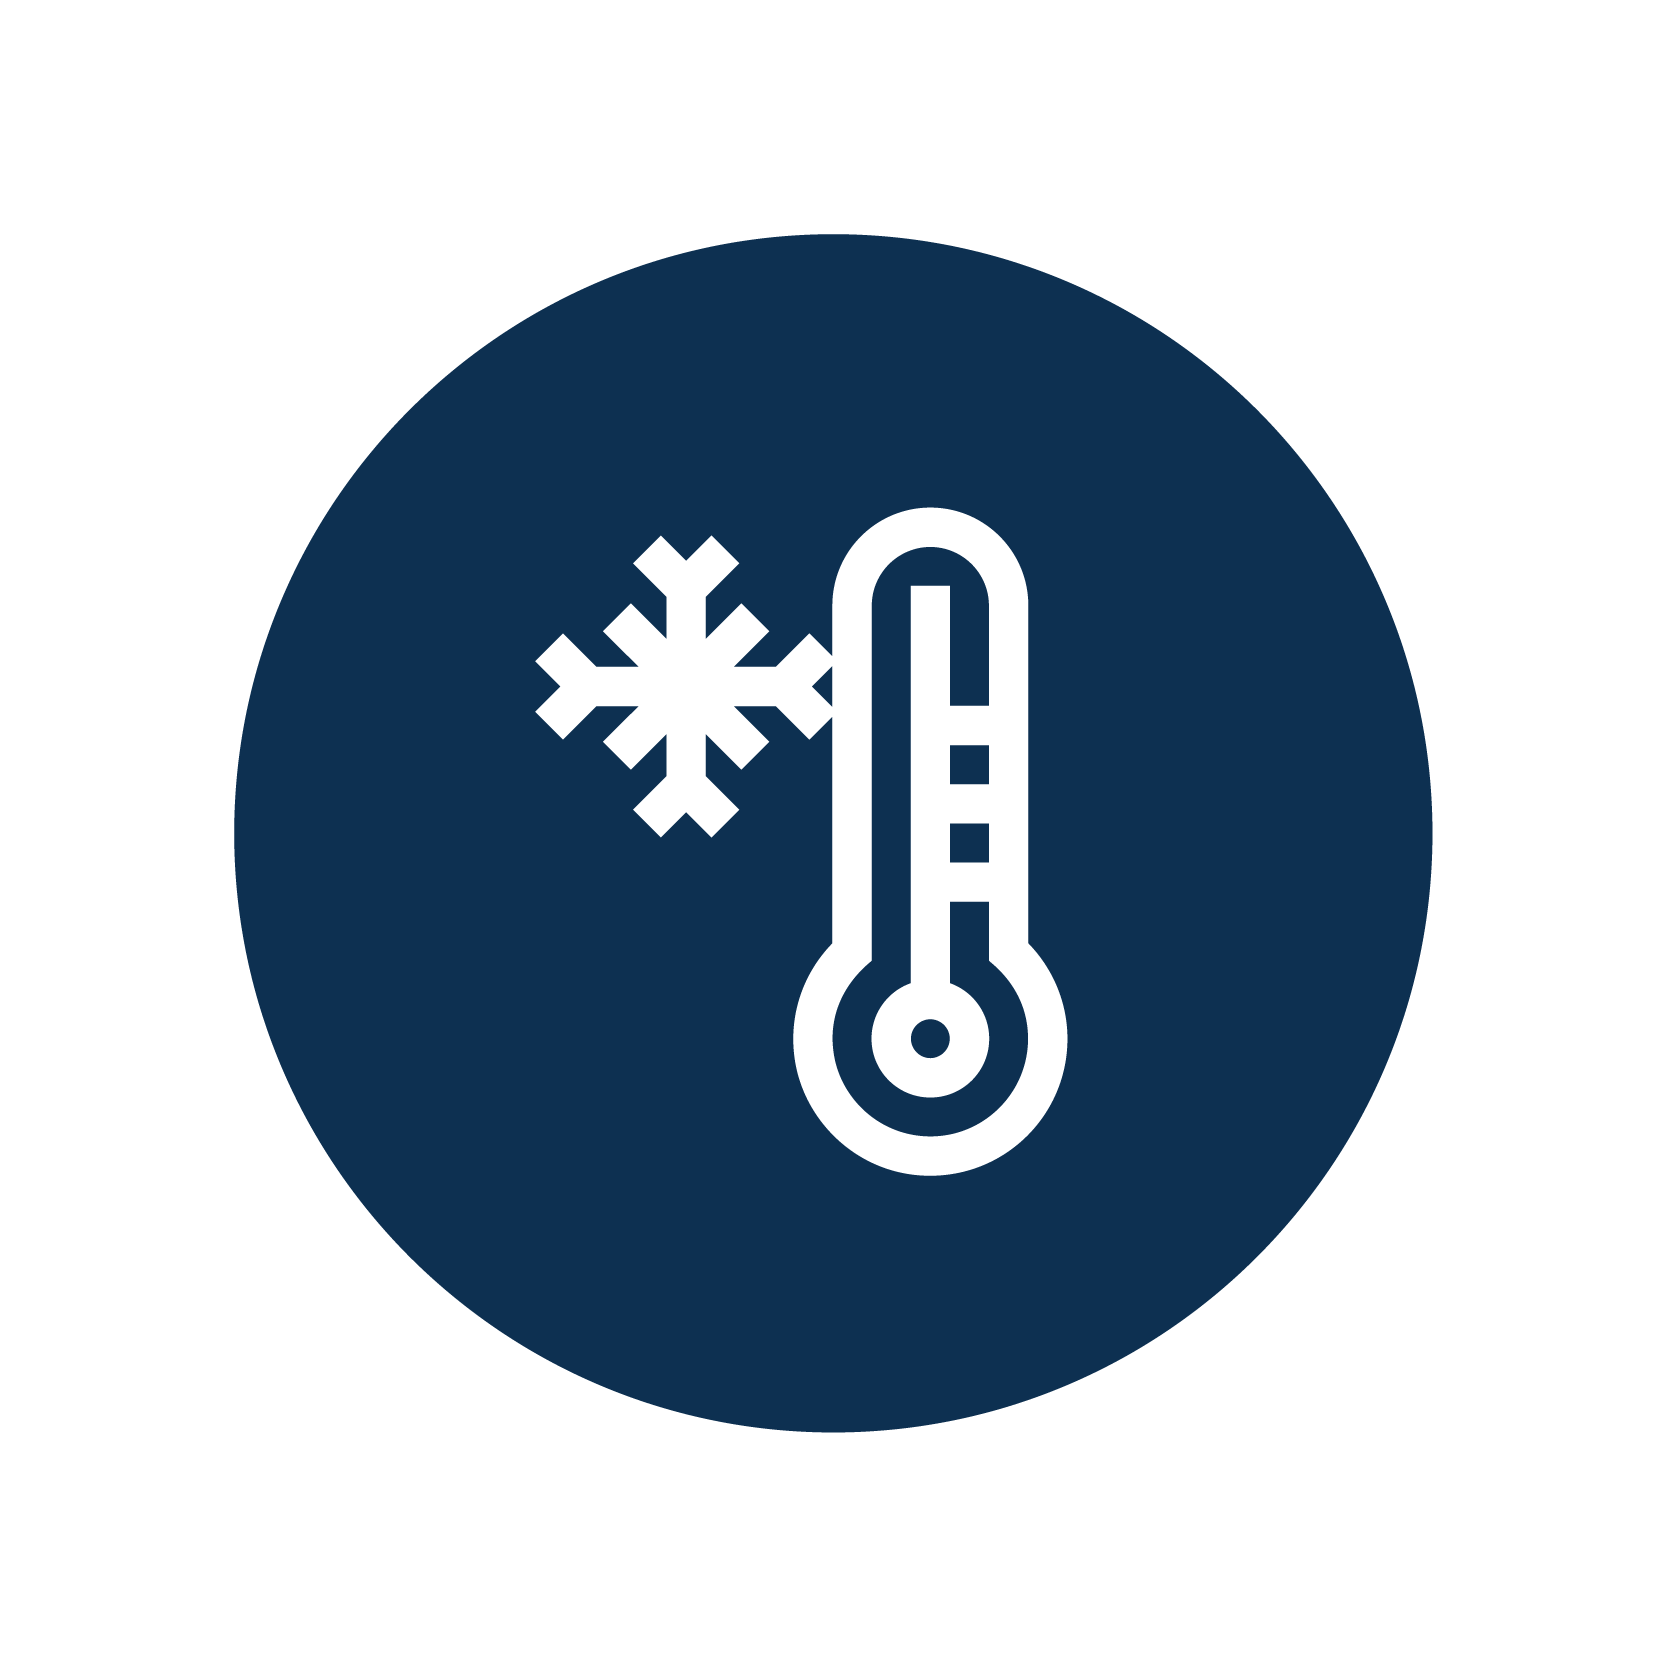 A blue and white icon with a thermometer and a snowflake.